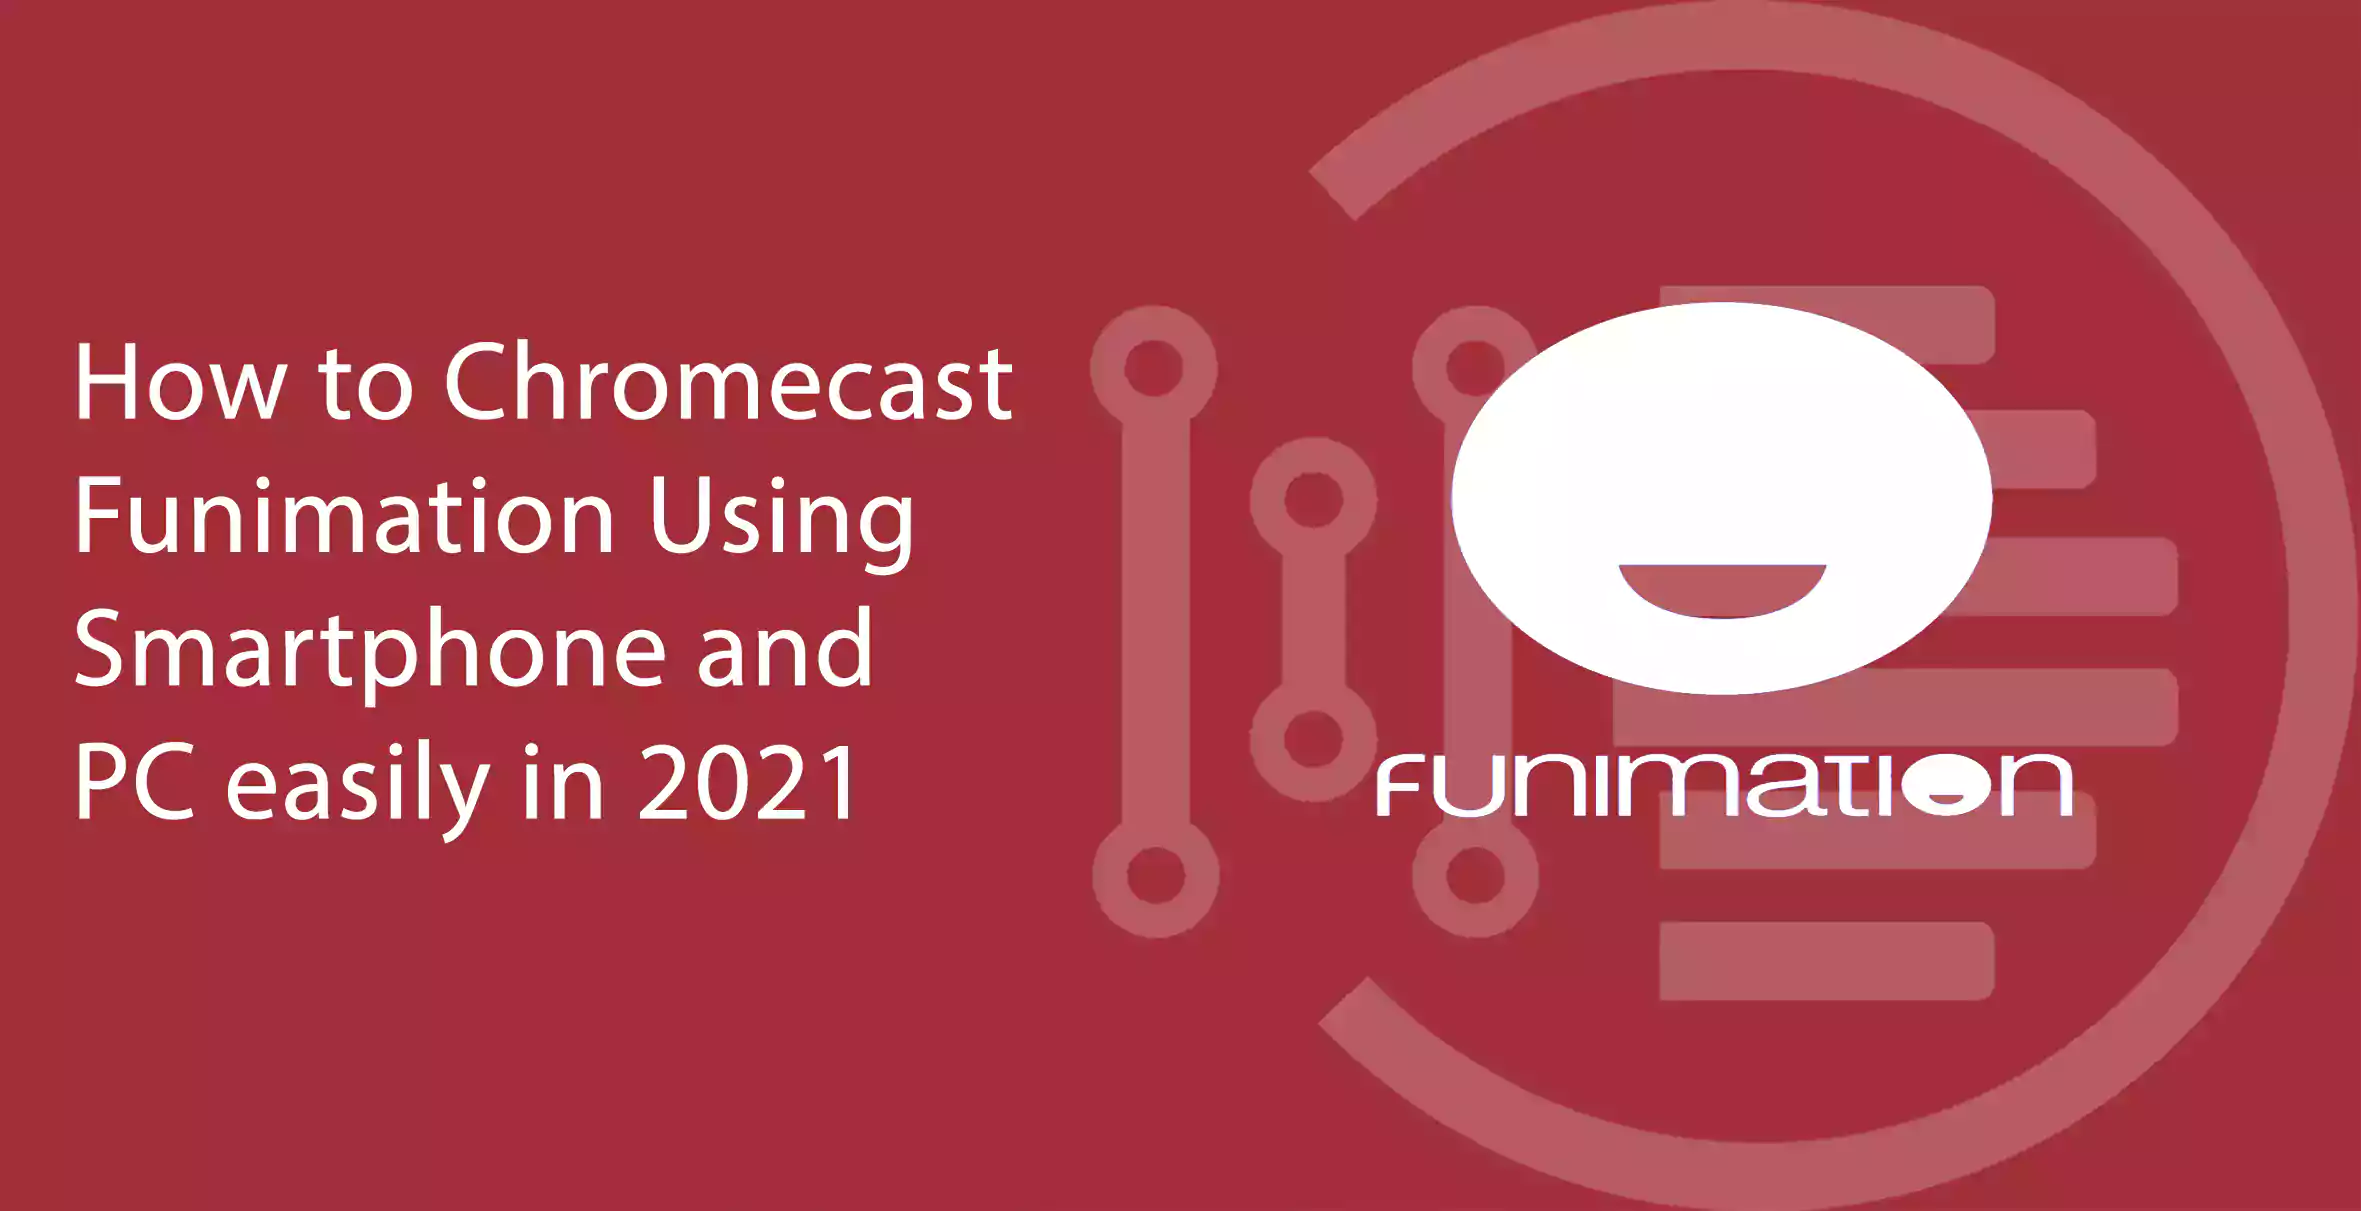 How to Chromecast Funimation Using Smartphone and PC